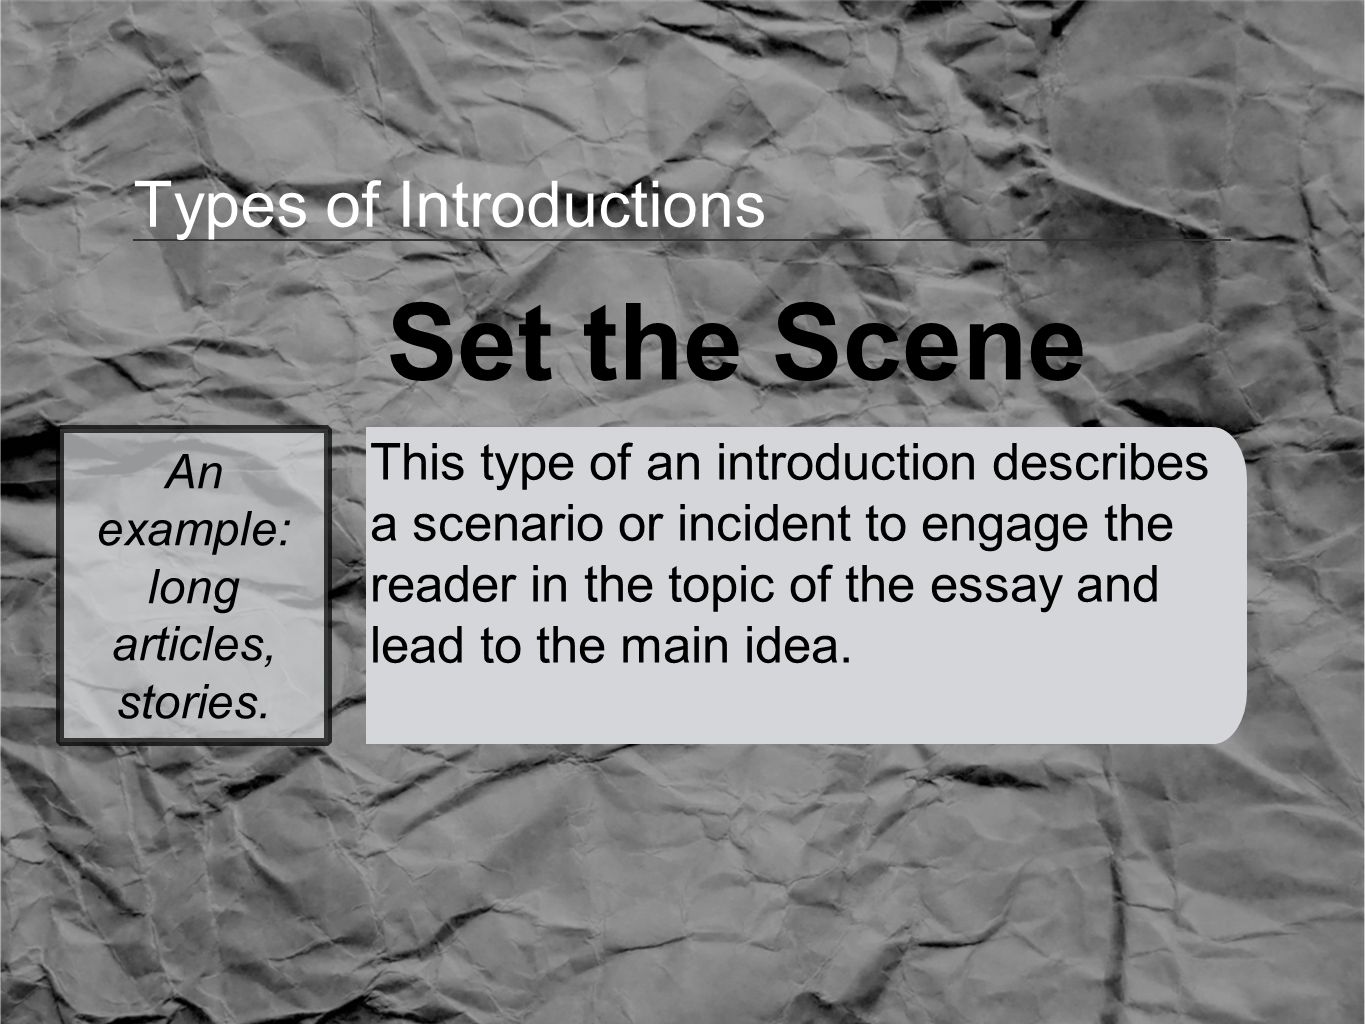 Types of Introductions Set the Scene This type of an introduction describes a scenario or incident to engage the reader in the topic of the essay and lead to the main idea.